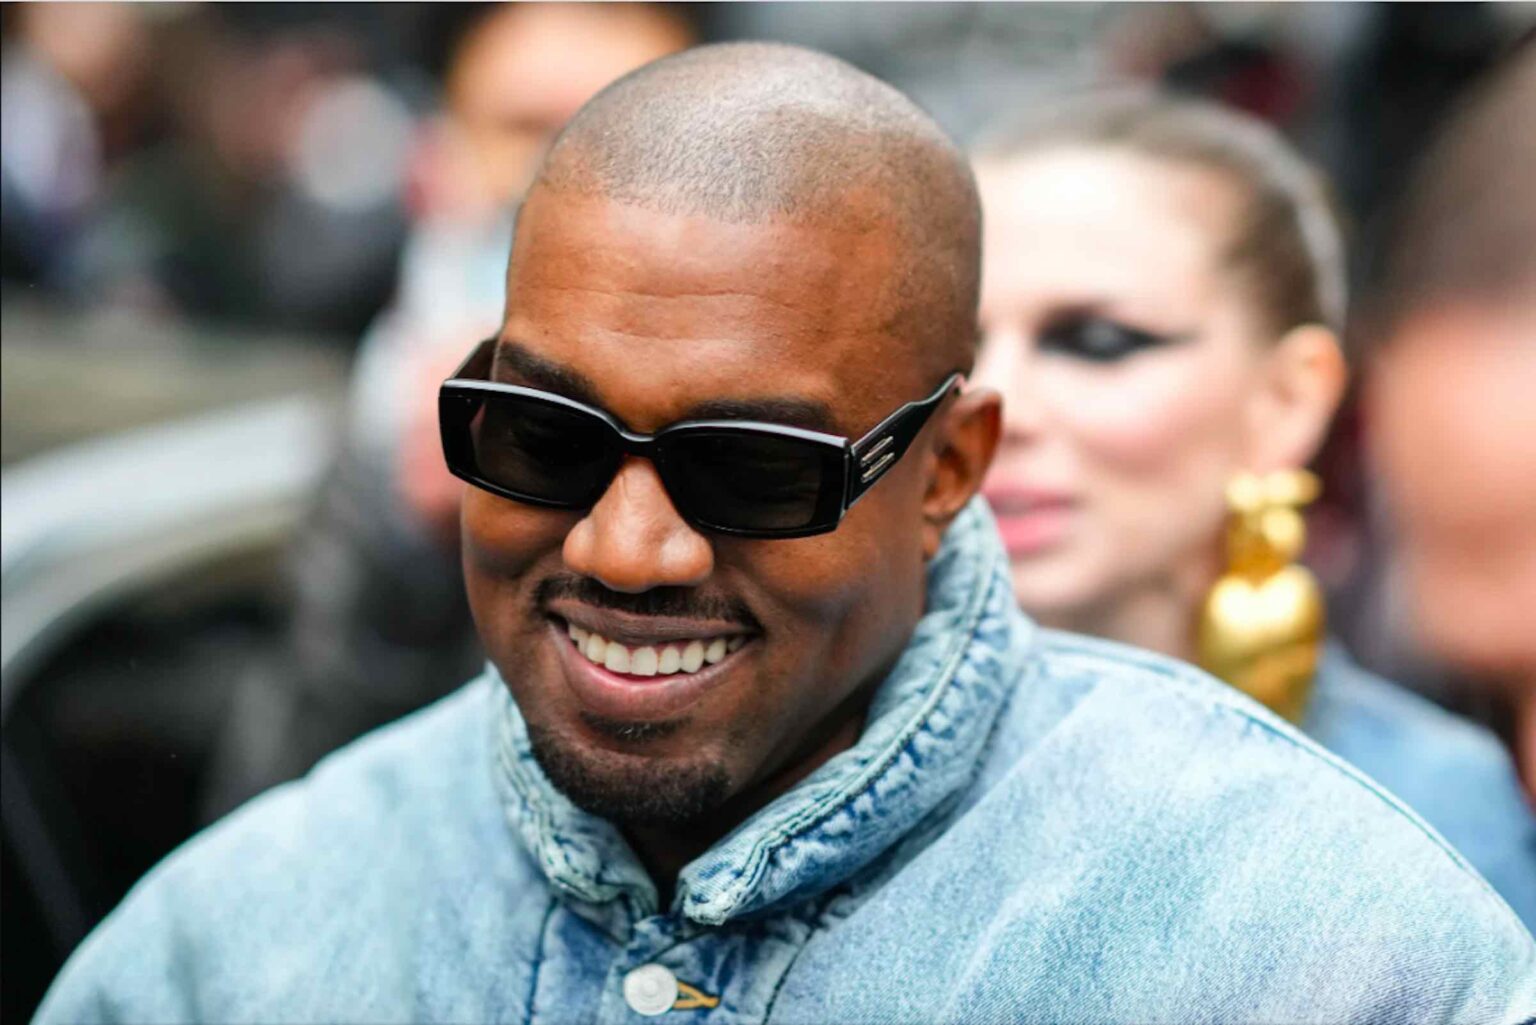 It appears as though Kanye West is in hot water yet again. How will this case affect the massive net worth of Kanye West? Find out all the details here.